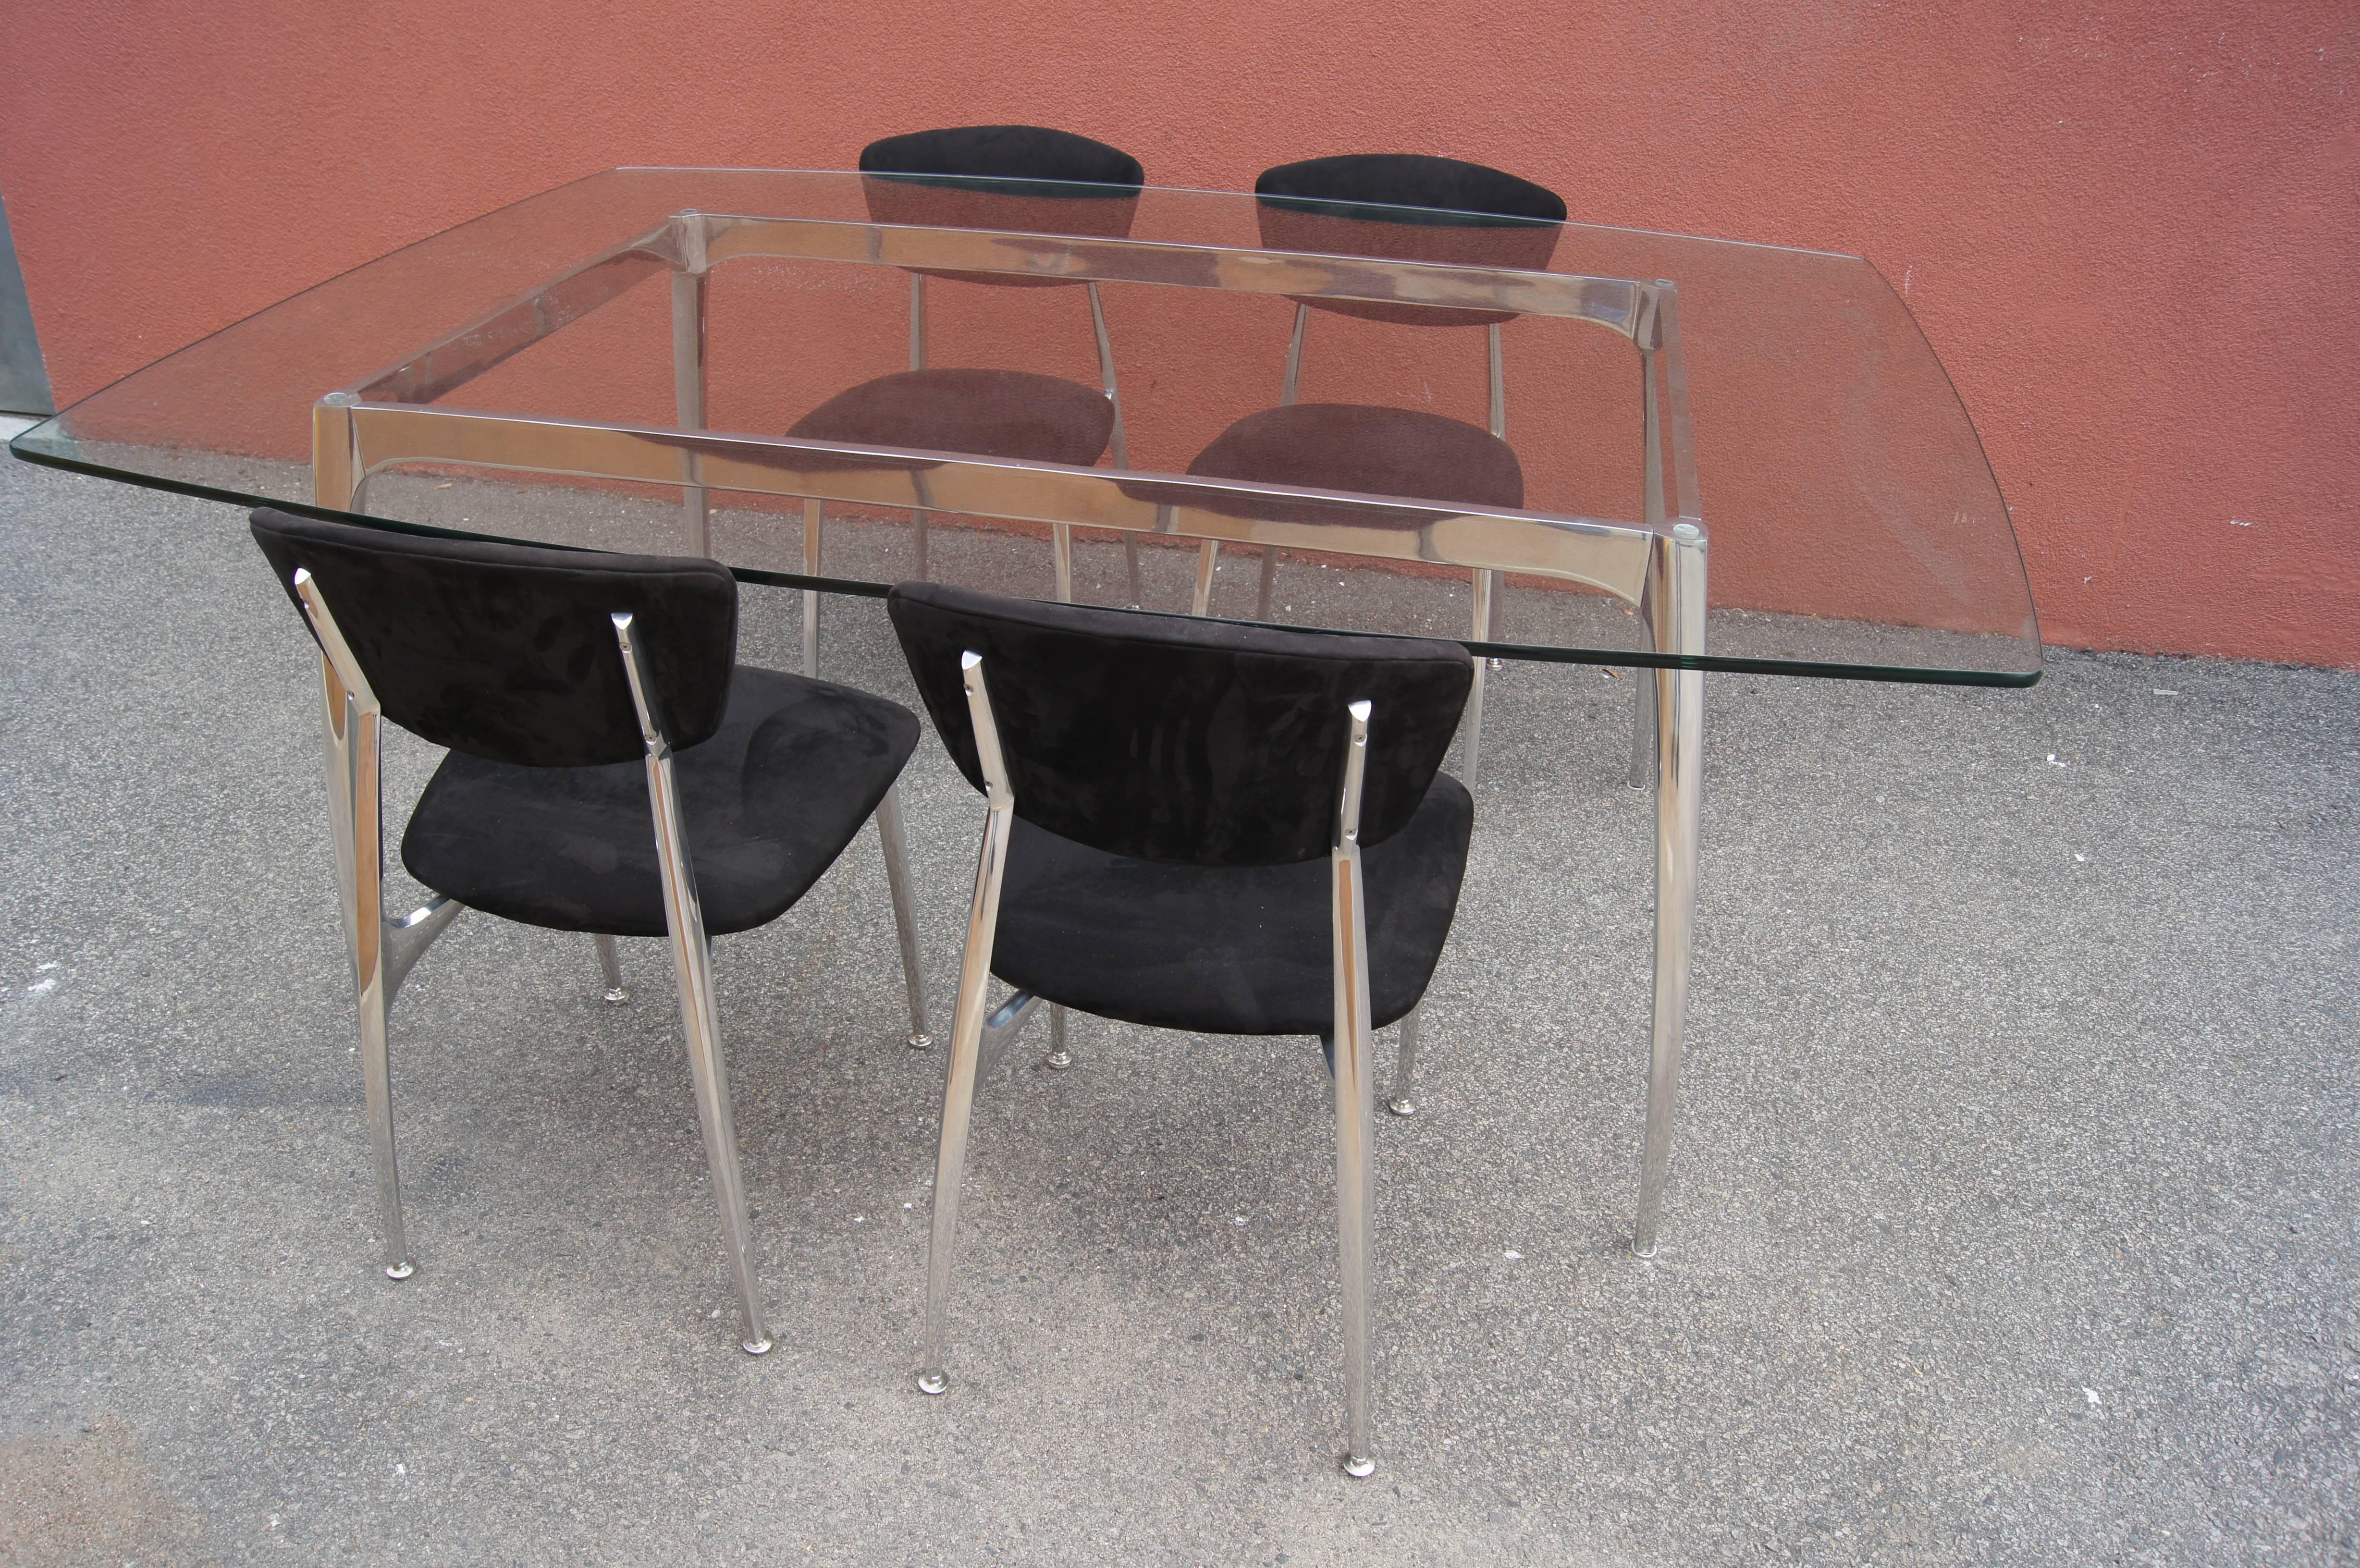 Polished Aluminum and Glass Dining Table with Matching Chairs by Nambé 1